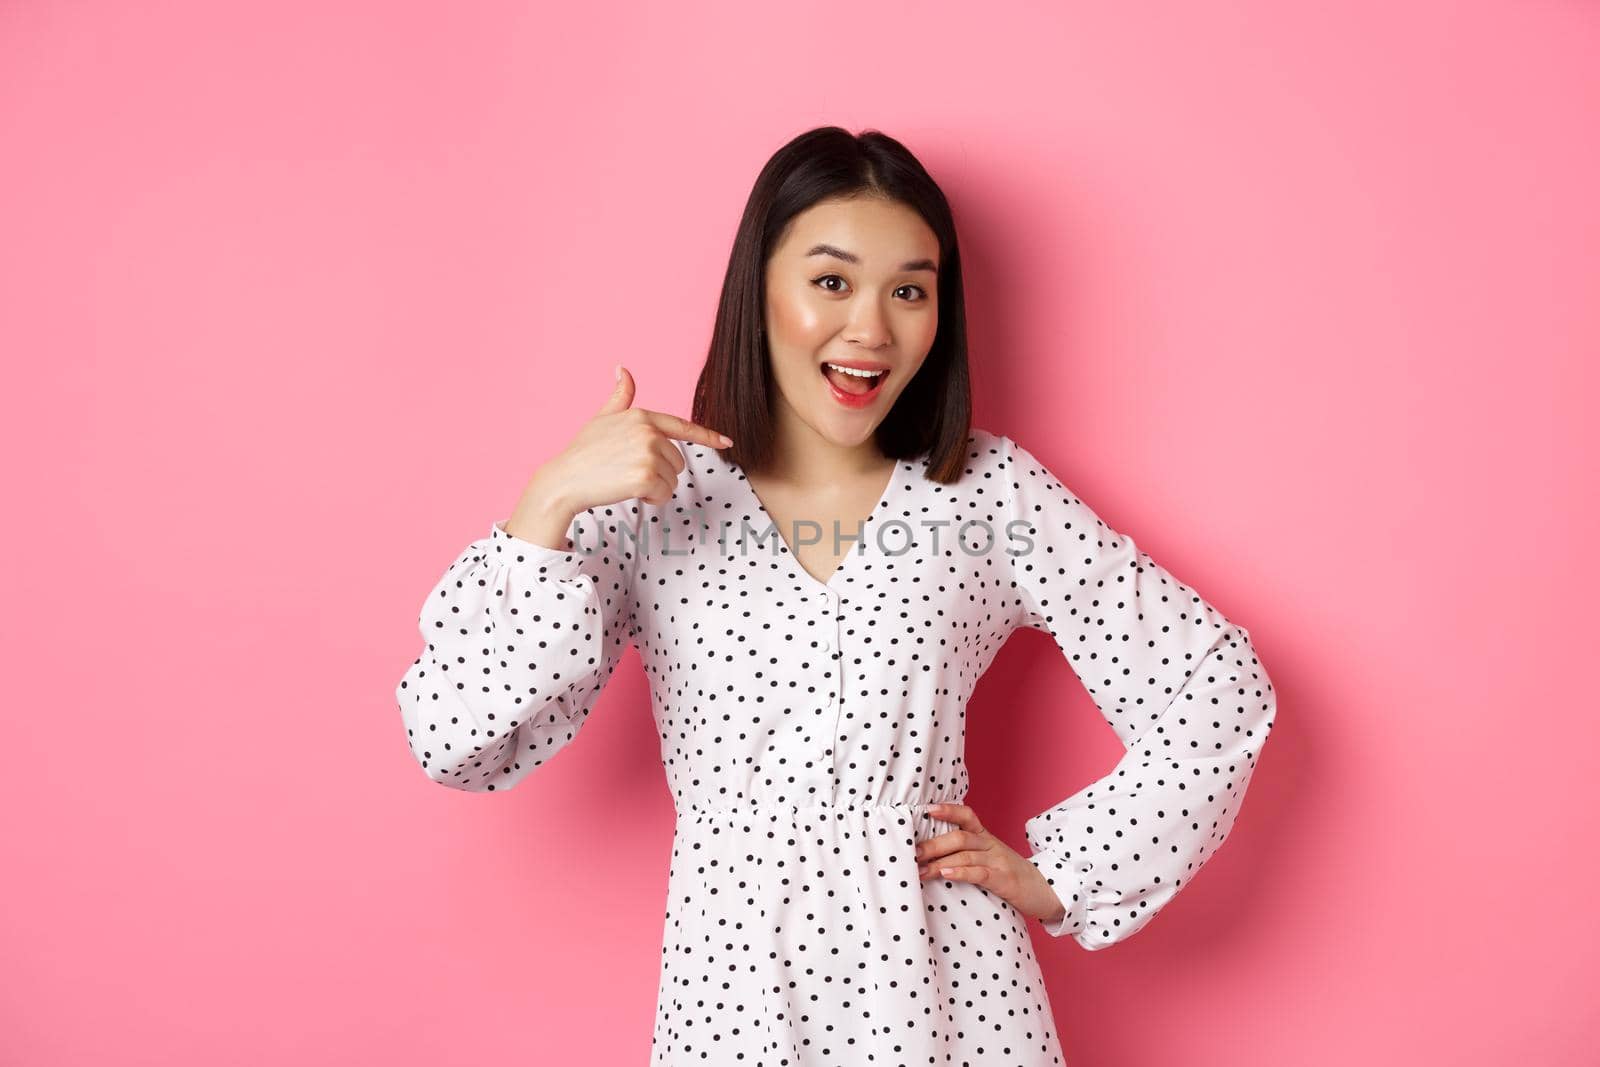 Beautiful asian girl in dress looking happy, pointing finger at herself, standing on romantic pink background.